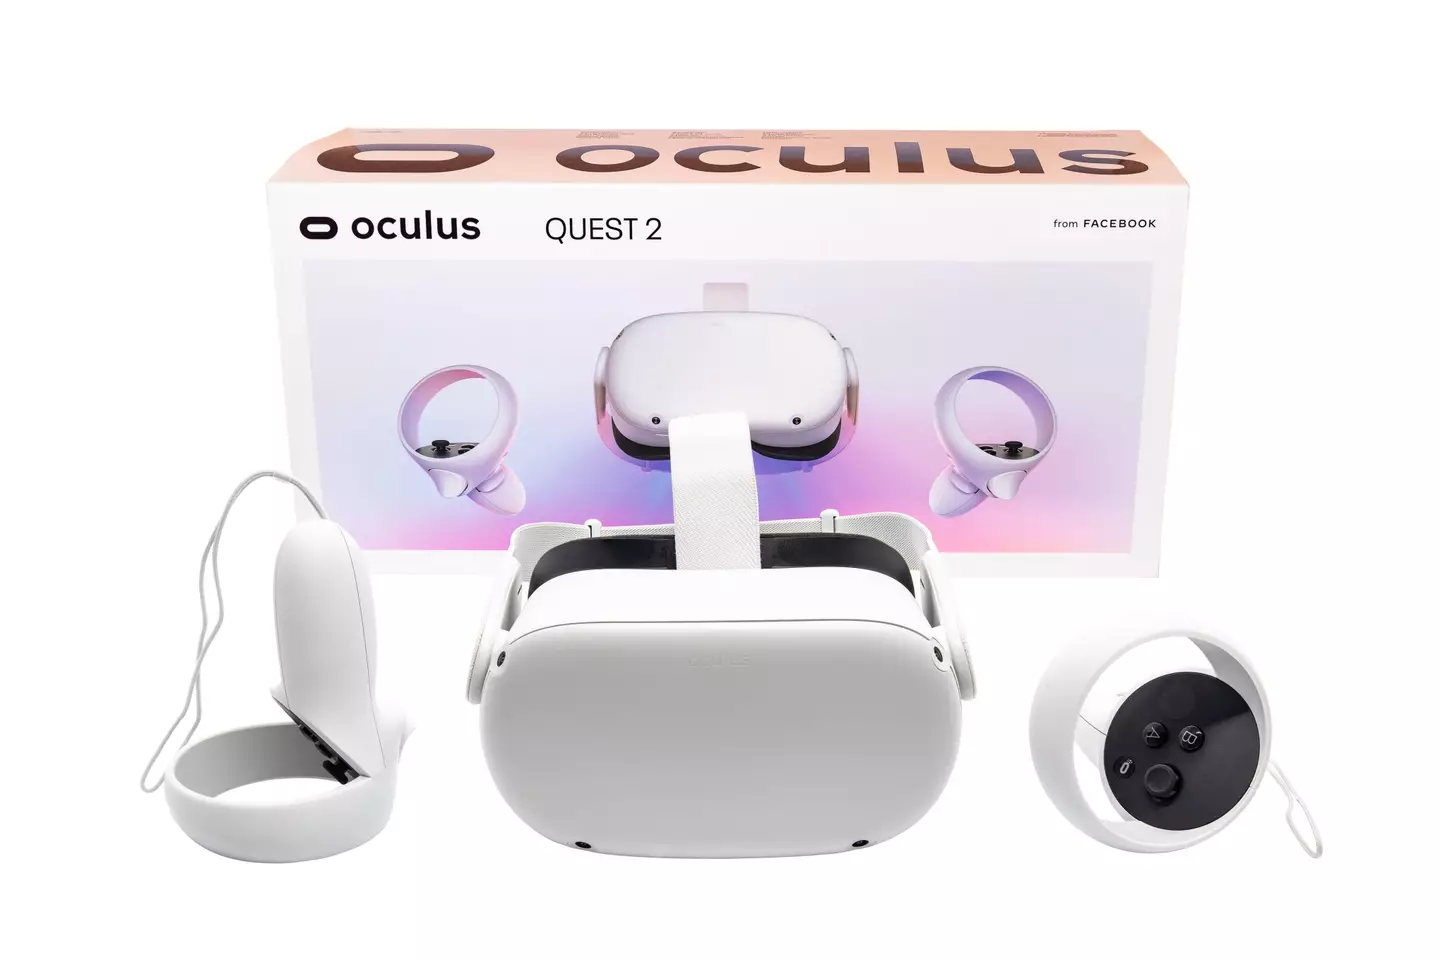 The boy allegedly wanted an Oculus VR headset.